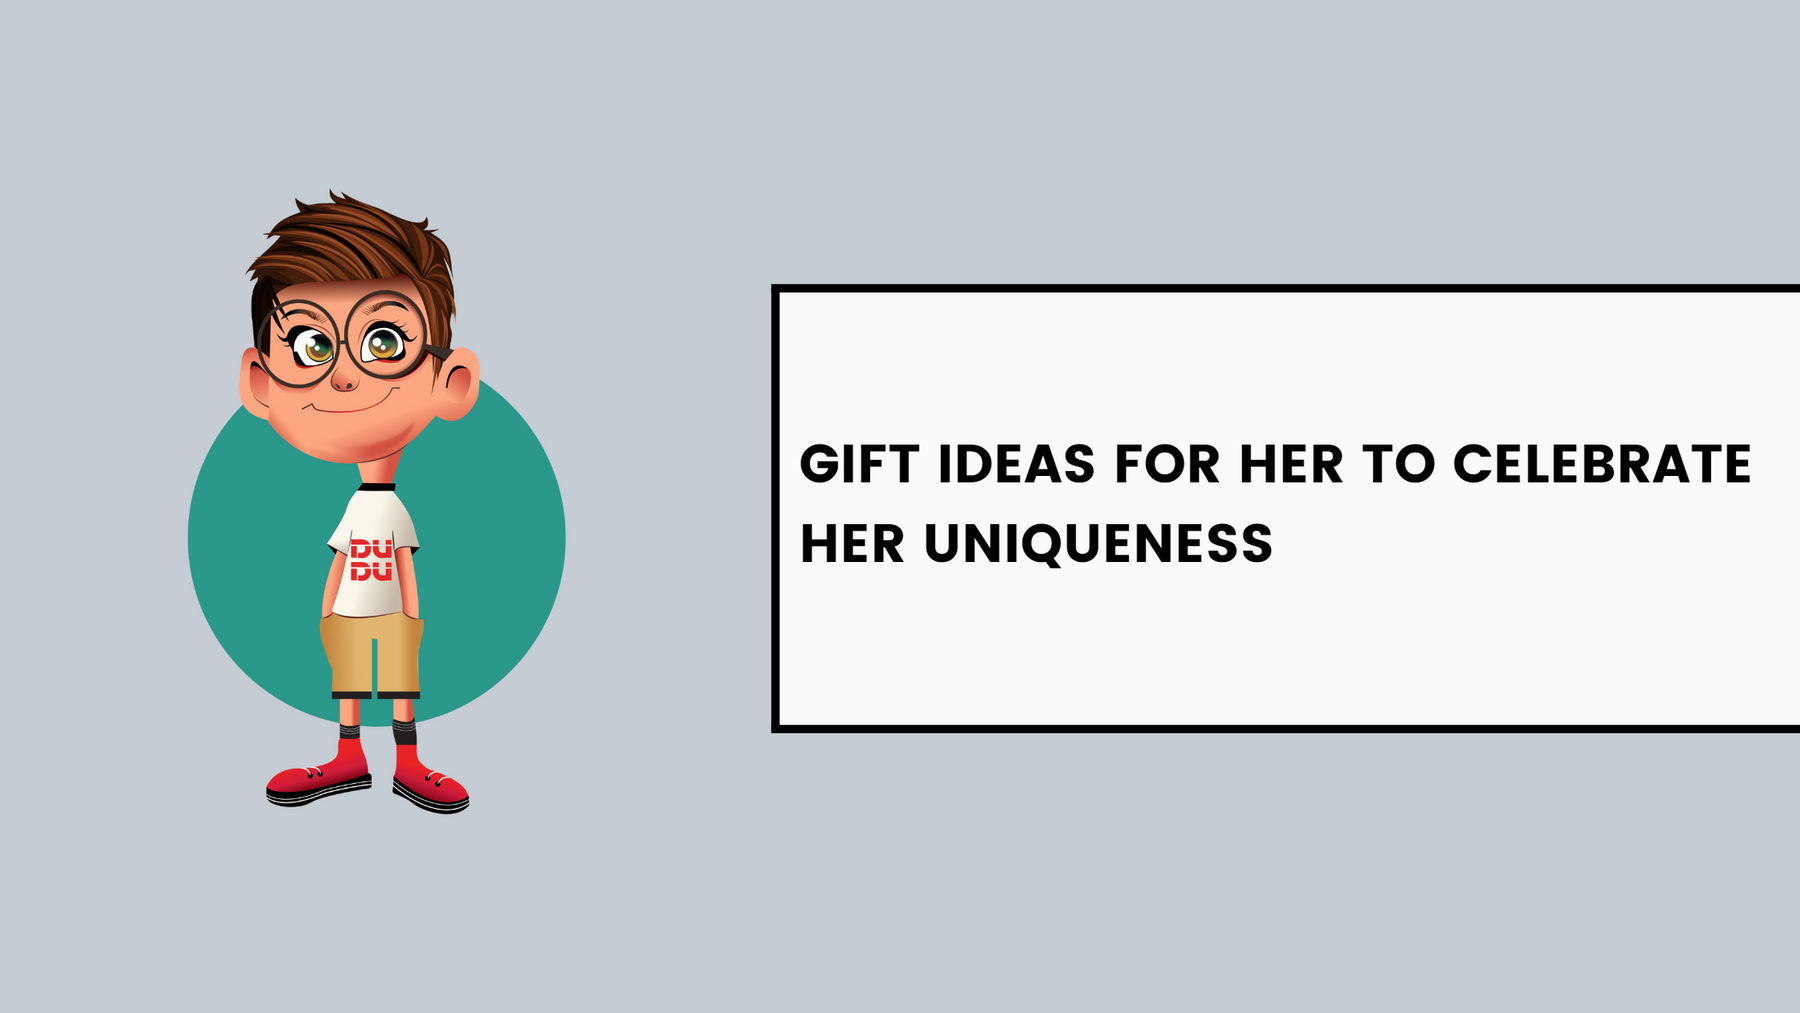 Gift Ideas for Her to Celebrate Her Uniqueness